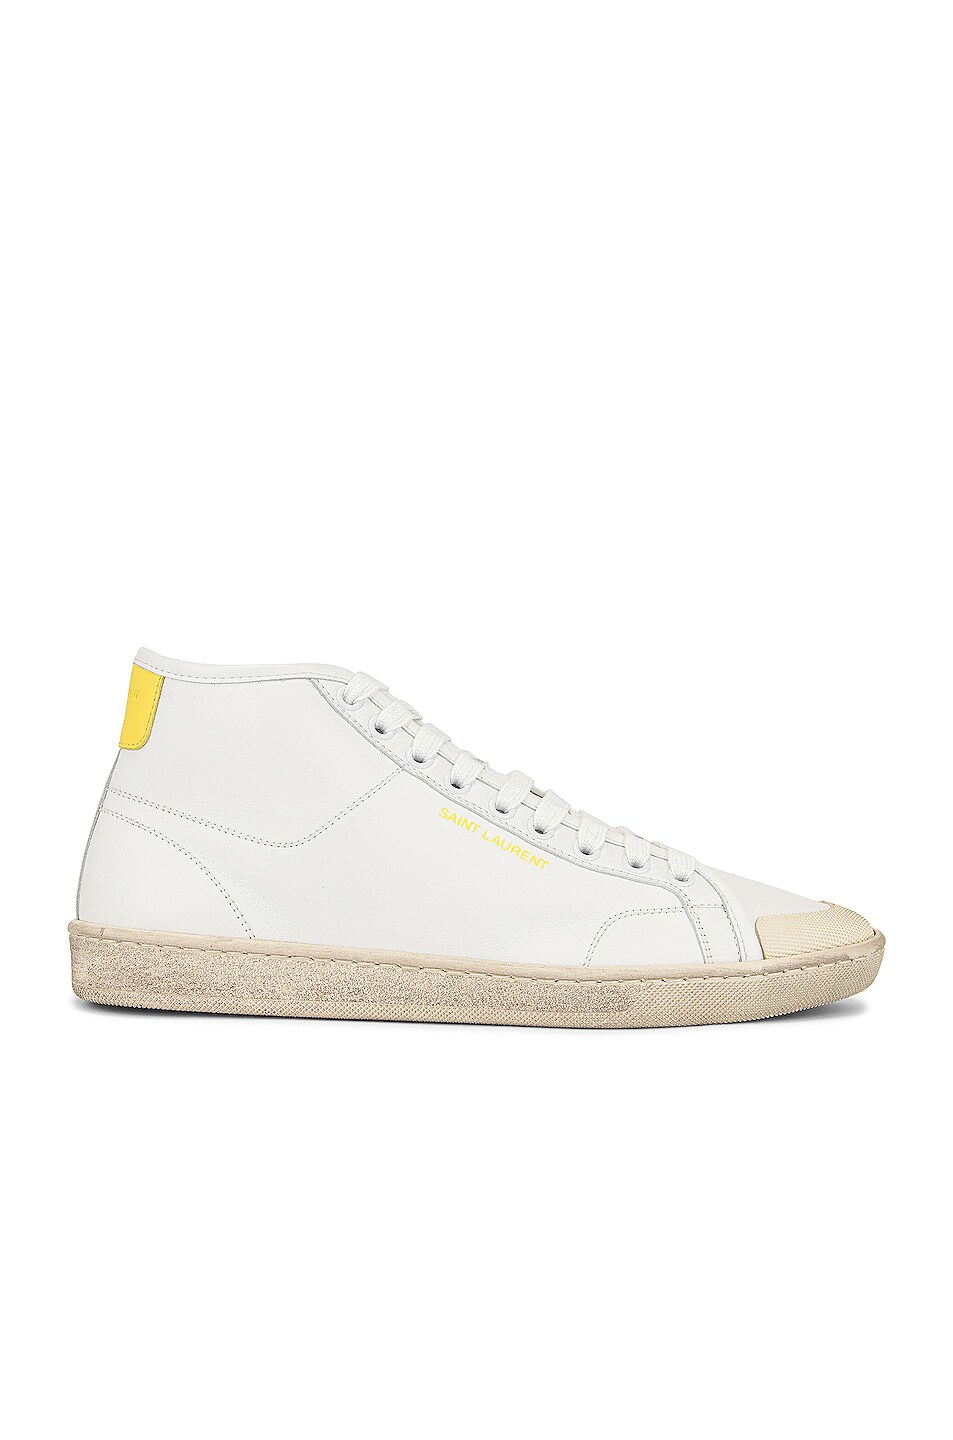 Image 1 of Saint Laurent SL 39 Mid Top Sneakers in Blanc Optique & Canary Yellow